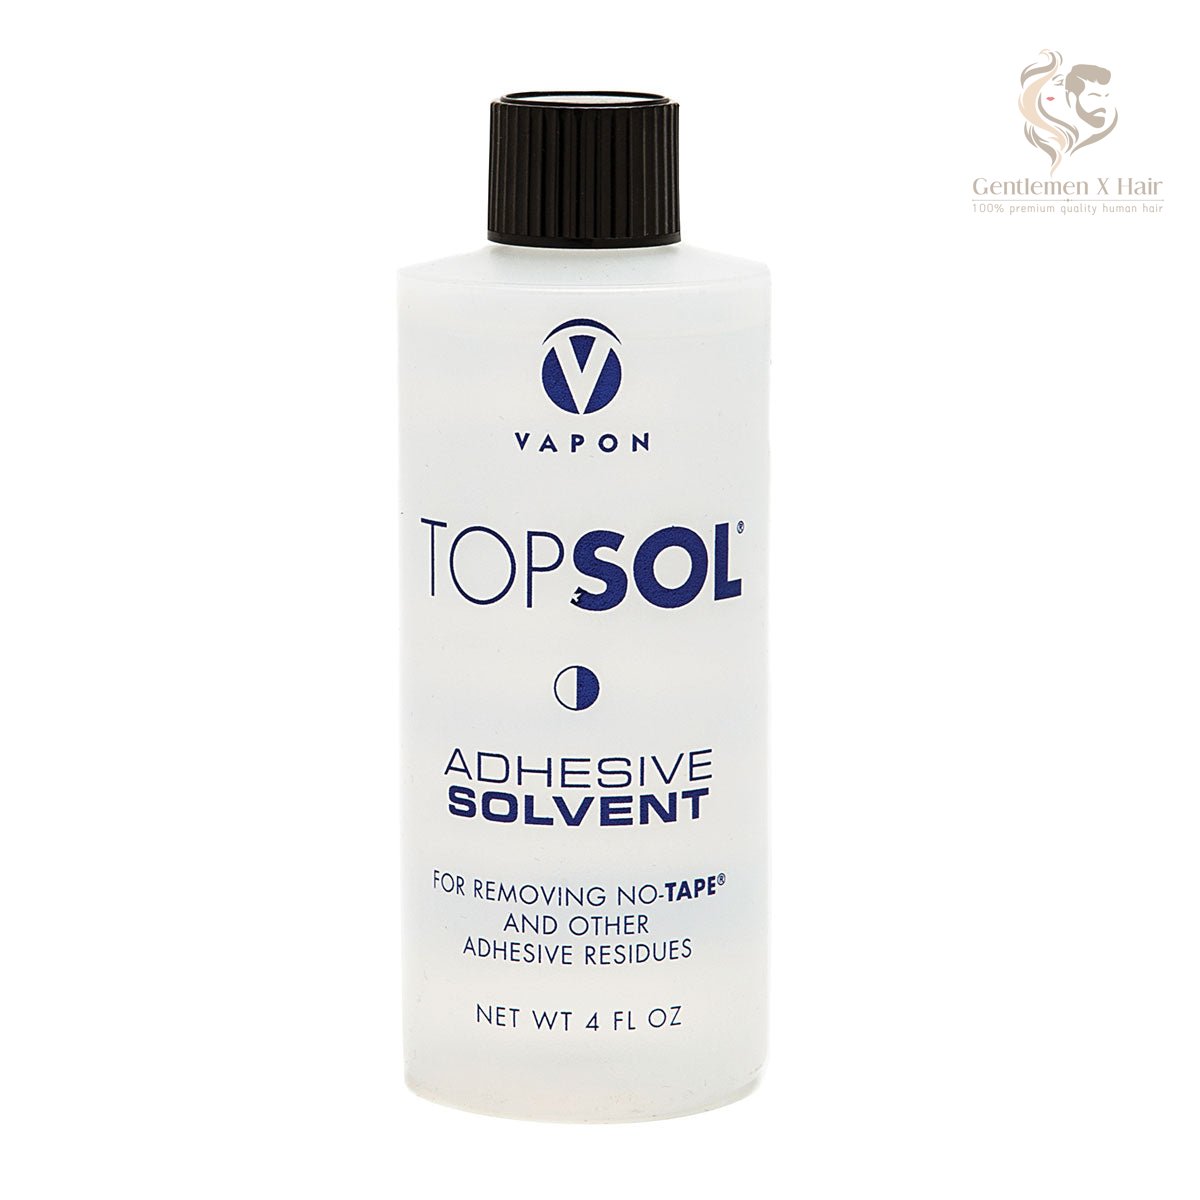 Vapon TOPSOL 4oz Adhesive Solvent Made In U.S.A